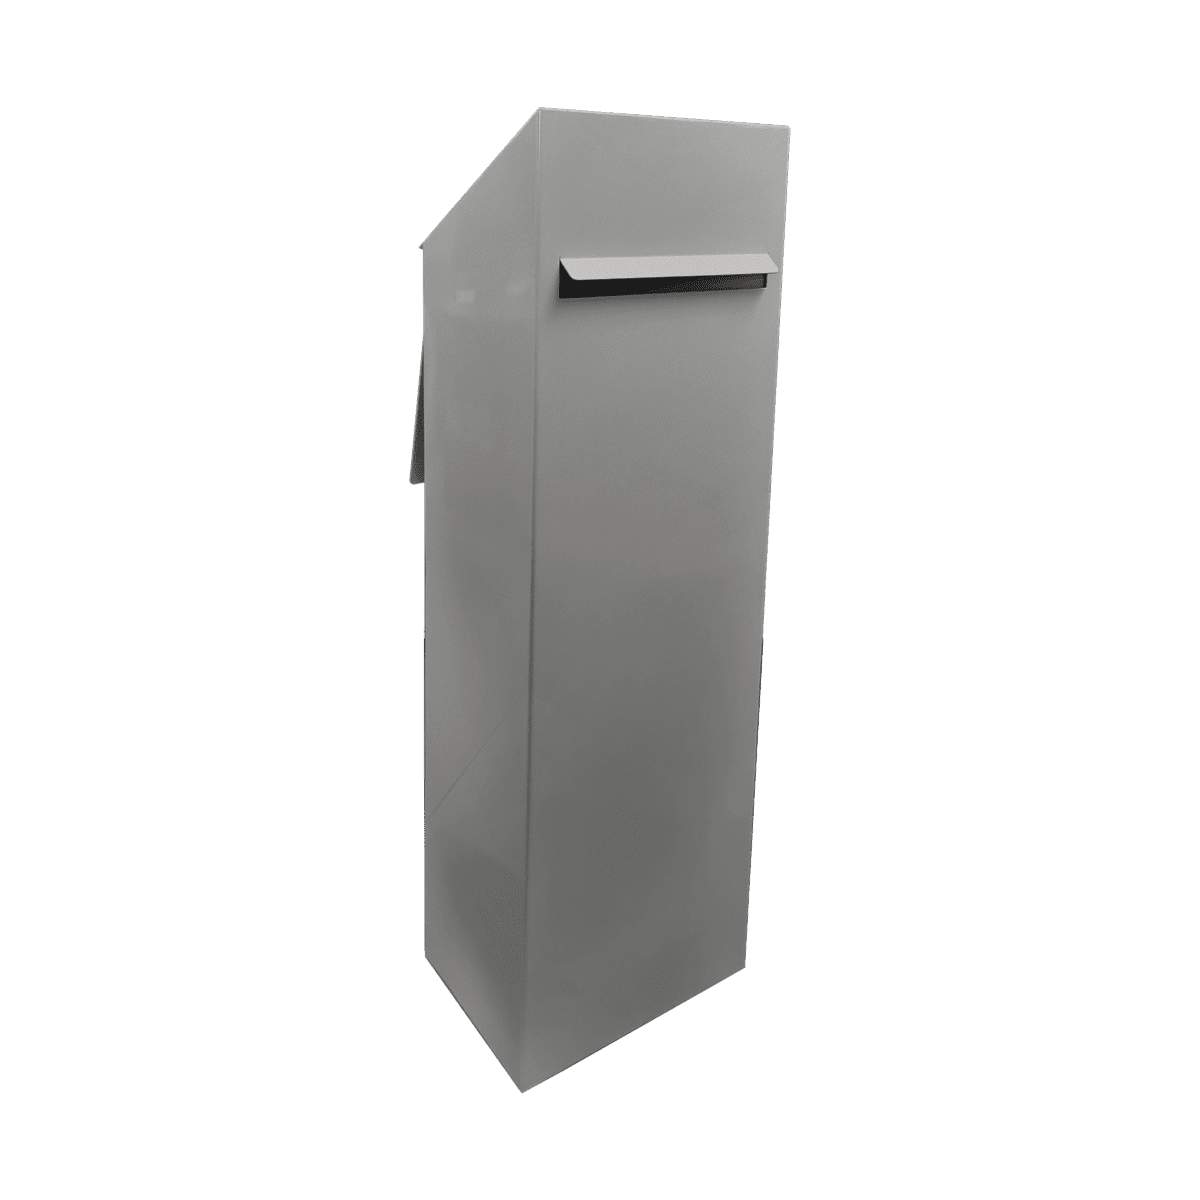 The Angle - Free Standing Letterbox